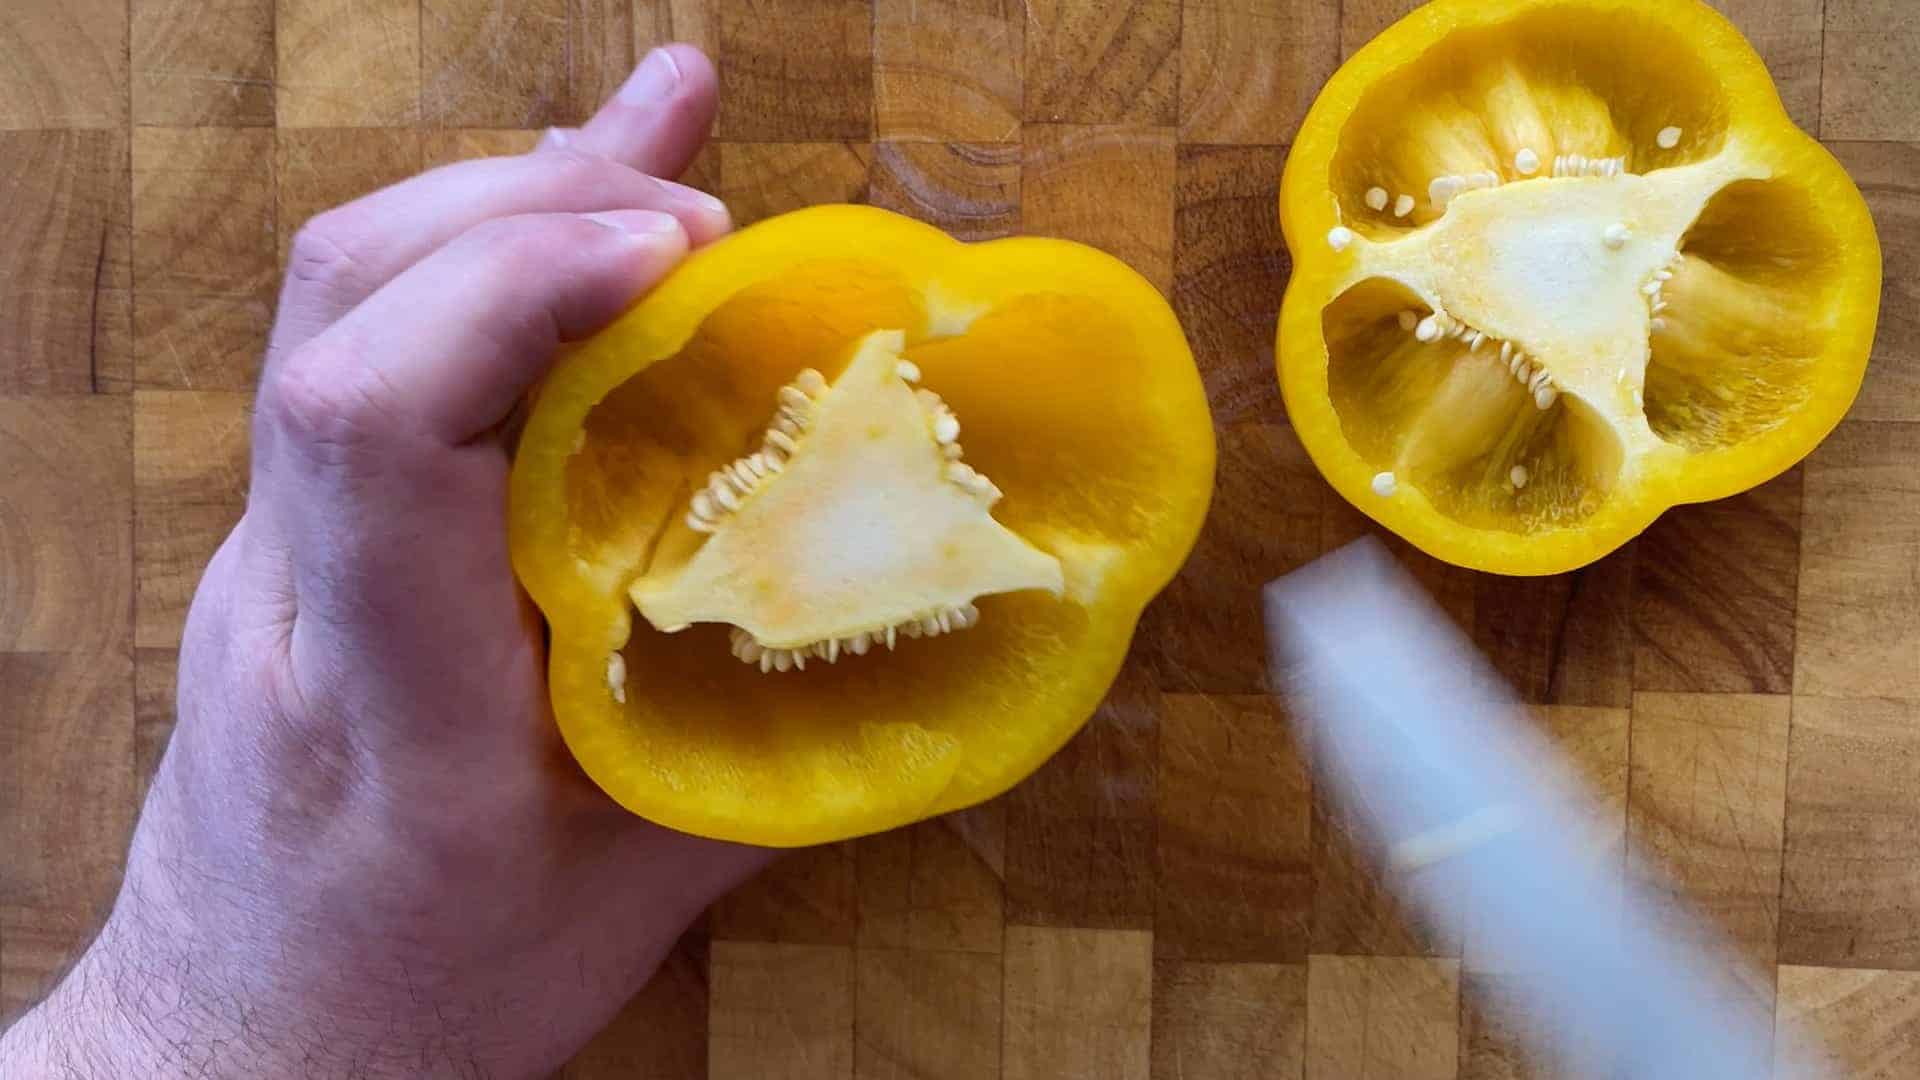 Trim top off peppers